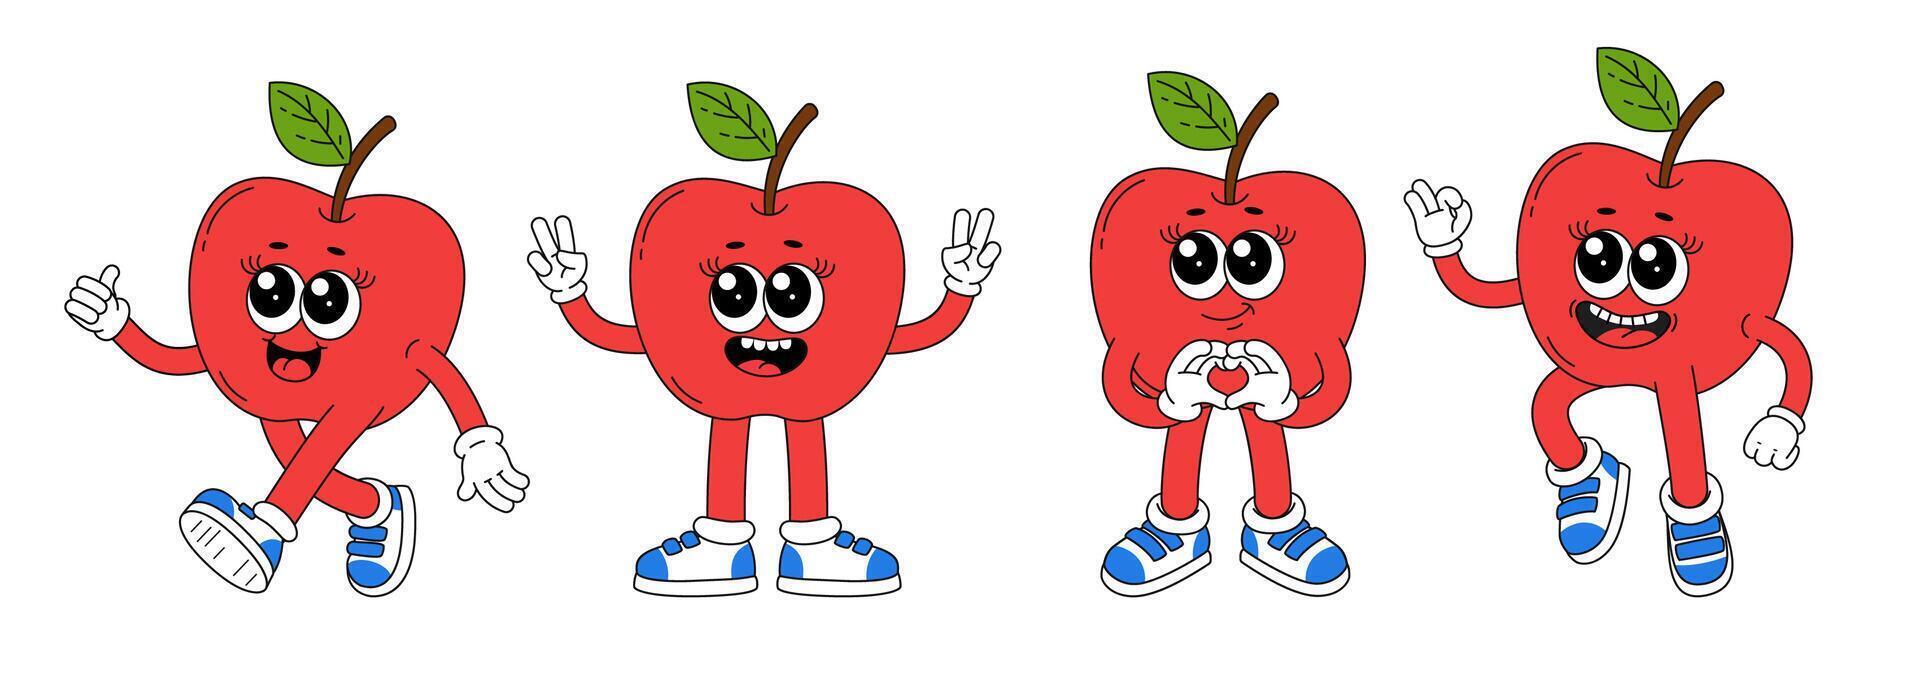 Cute cartoon apple character in different poses. Comic illustration of fresh summer fruit. vector